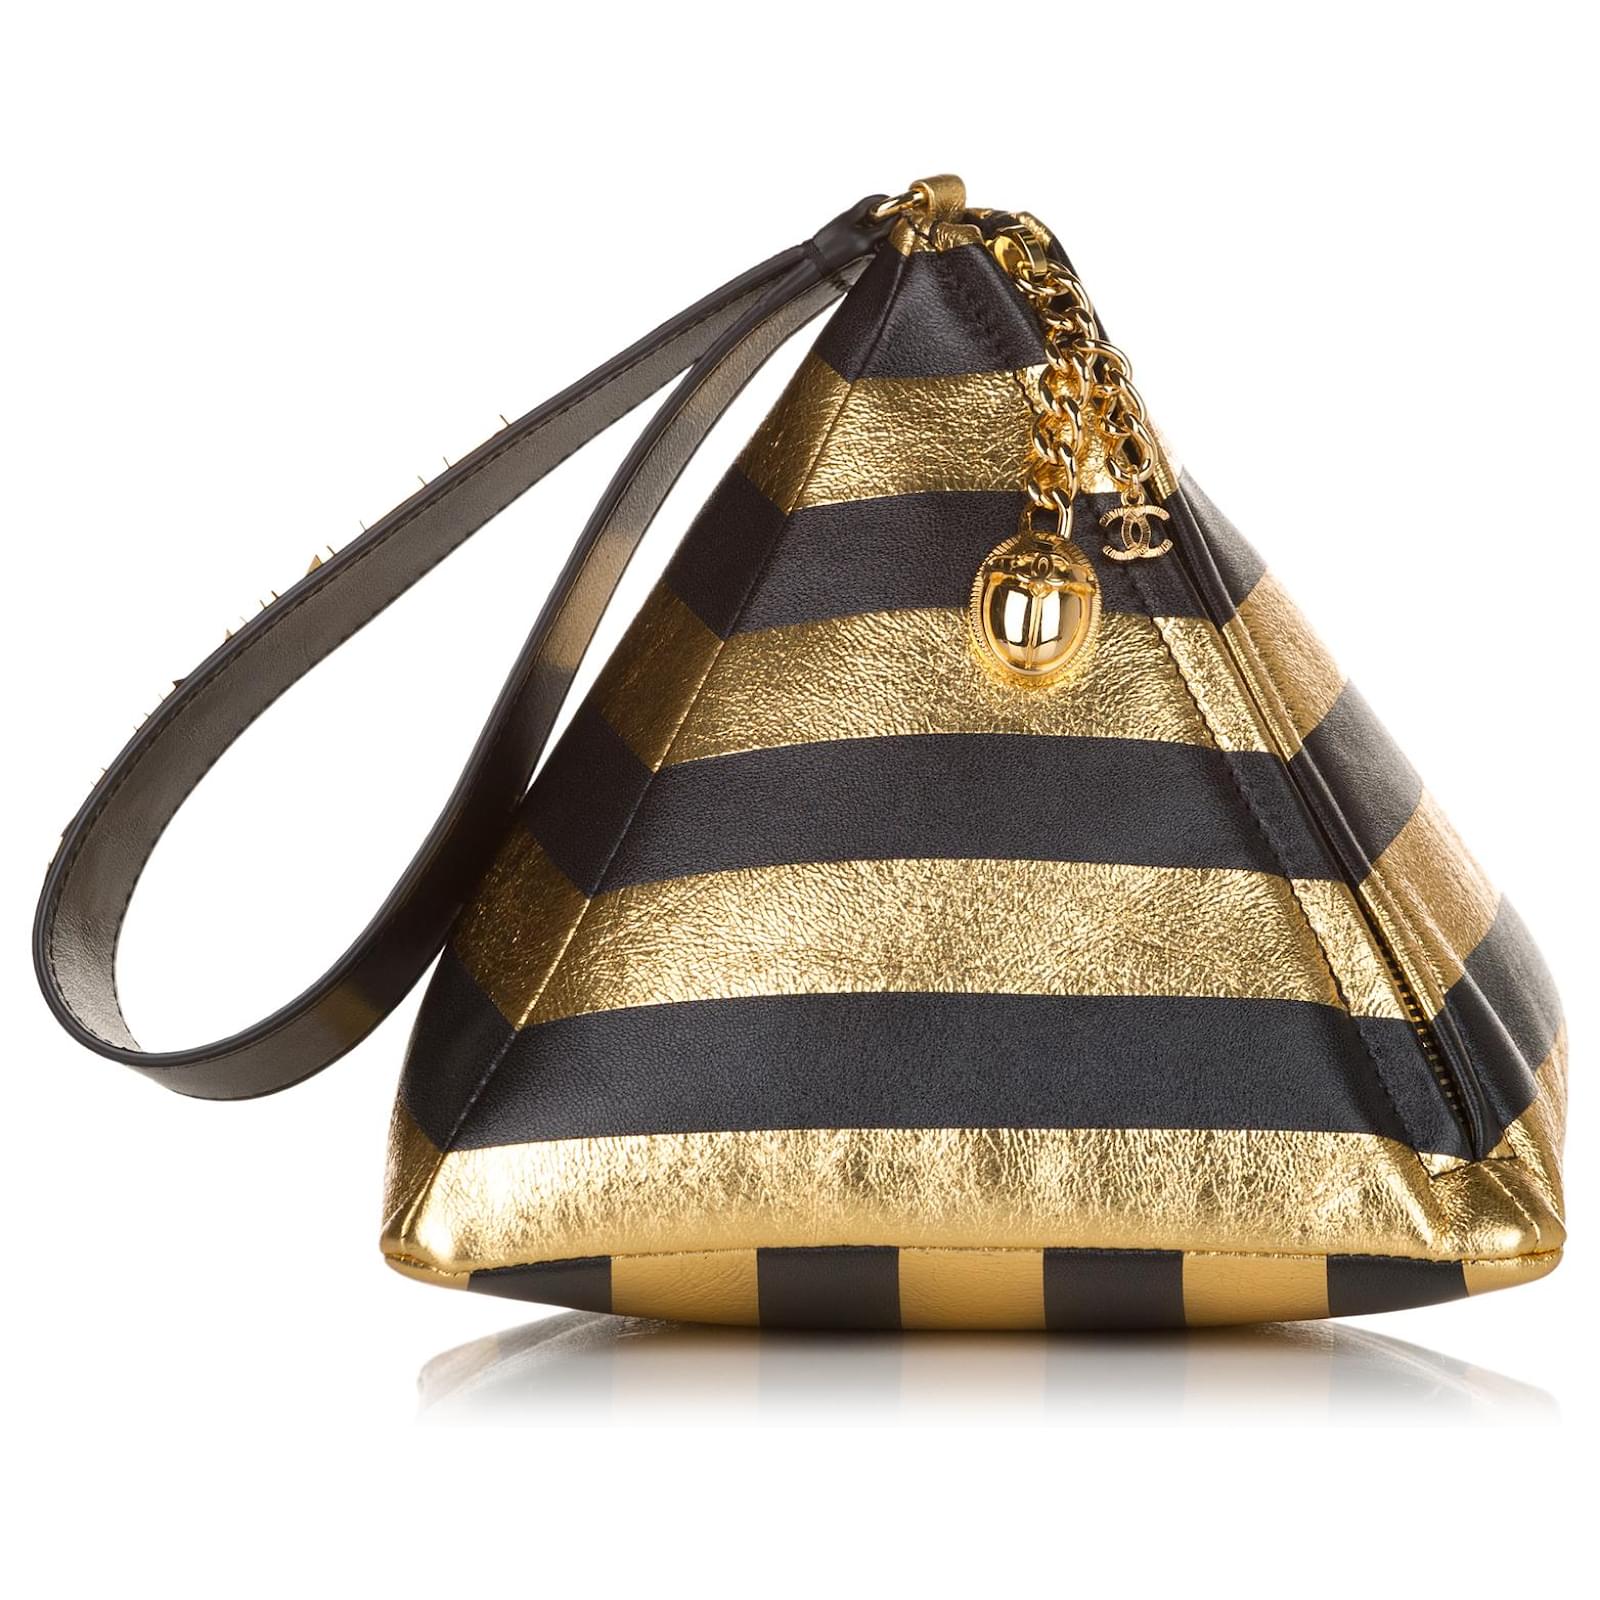 Chanel Black Kheops Pyramid Leather Clutch Bag Golden Pony-style